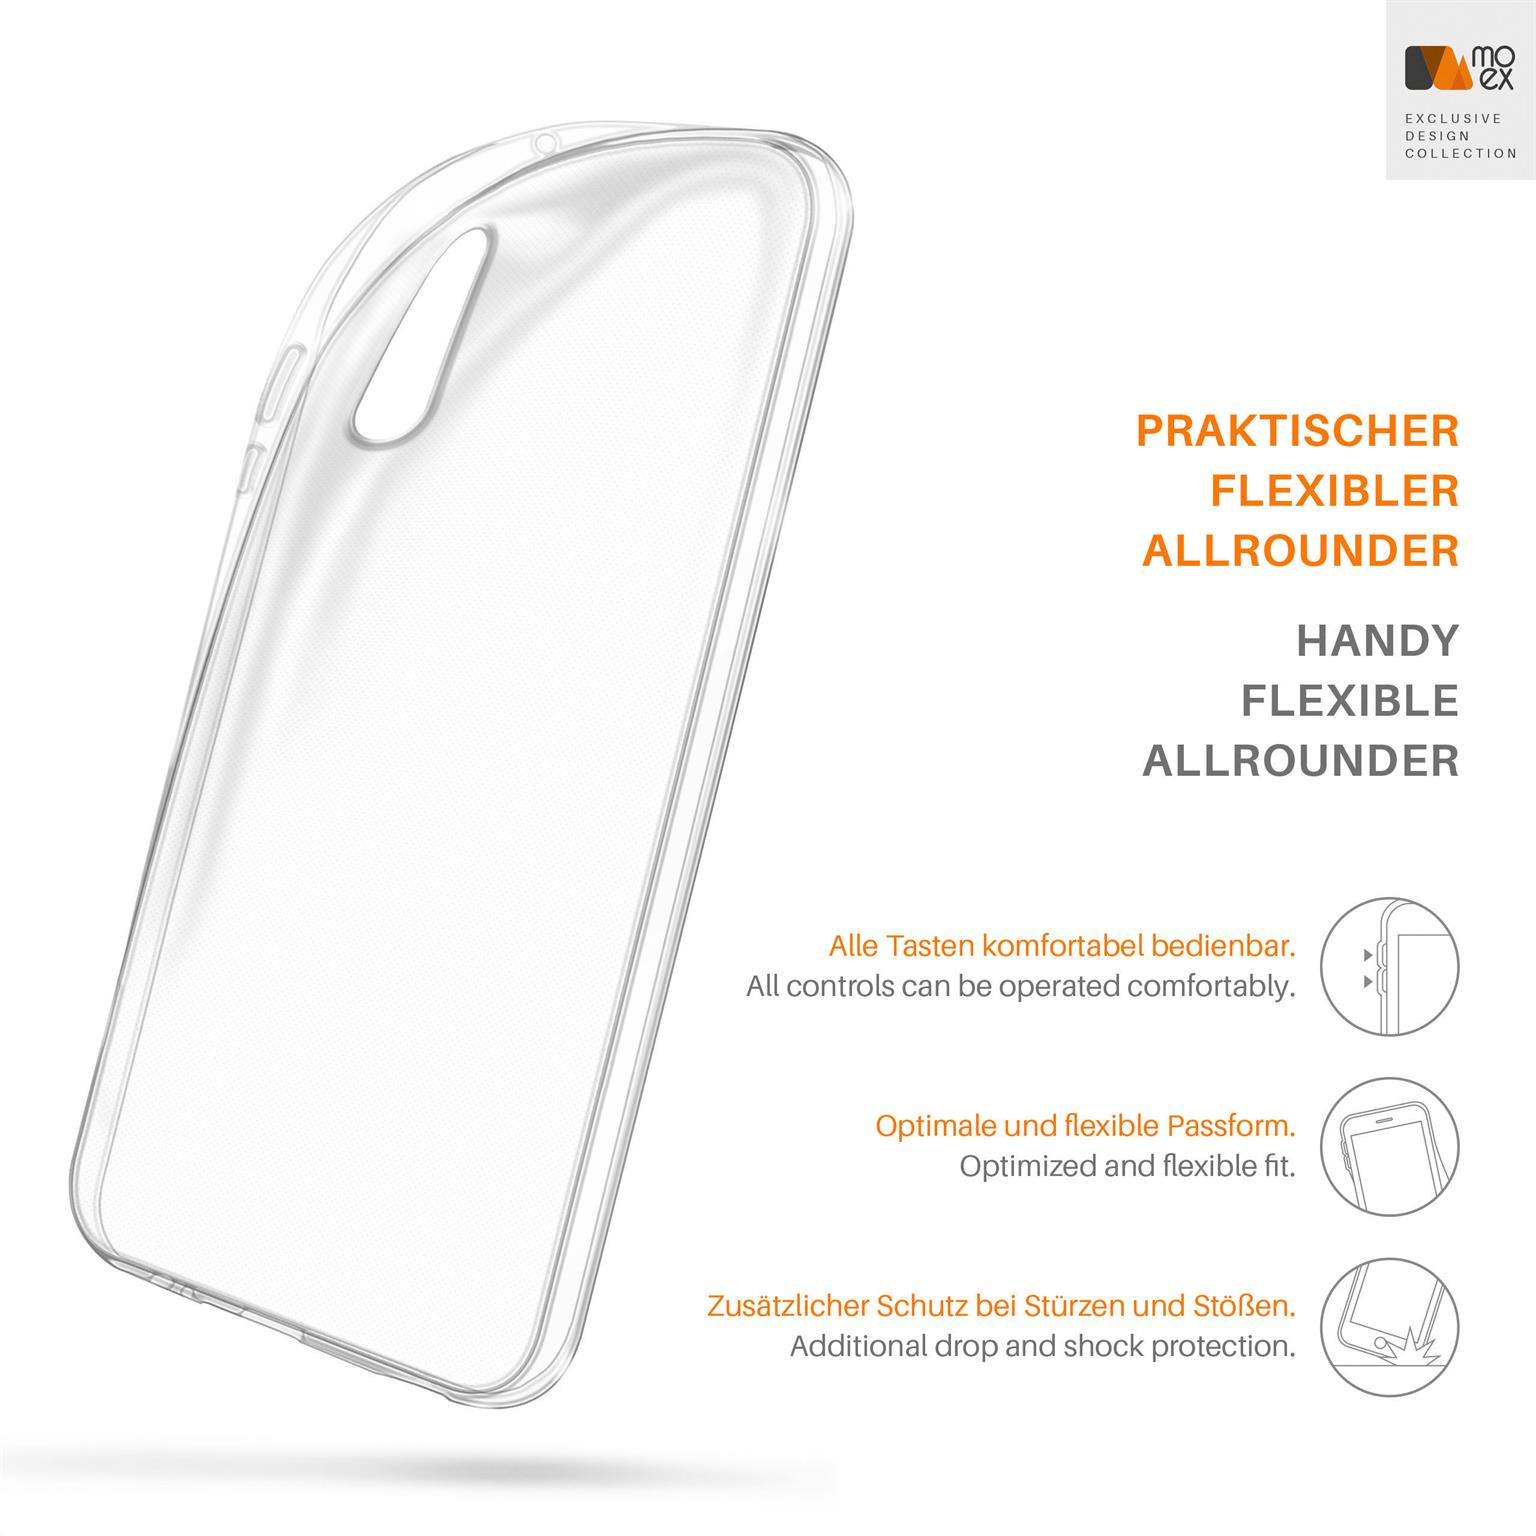 Crystal-Clear Aero MOEX Pro, Case, Backcover, Huawei, P20